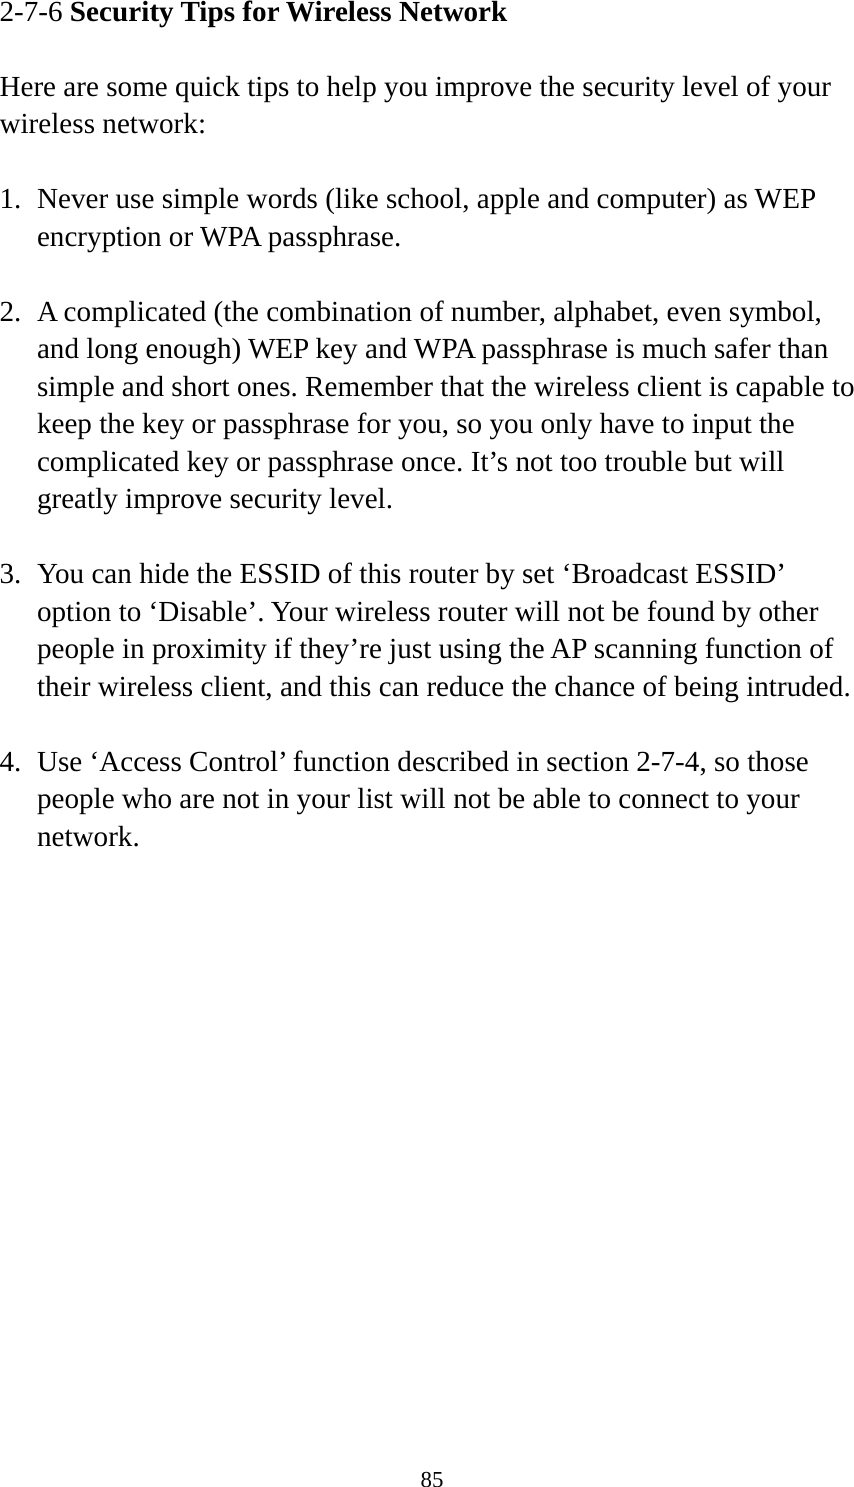 85 2-7-6 Security Tips for Wireless Network  Here are some quick tips to help you improve the security level of your wireless network:  1. Never use simple words (like school, apple and computer) as WEP encryption or WPA passphrase.  2. A complicated (the combination of number, alphabet, even symbol, and long enough) WEP key and WPA passphrase is much safer than simple and short ones. Remember that the wireless client is capable to keep the key or passphrase for you, so you only have to input the complicated key or passphrase once. It’s not too trouble but will greatly improve security level.  3. You can hide the ESSID of this router by set ‘Broadcast ESSID’ option to ‘Disable’. Your wireless router will not be found by other people in proximity if they’re just using the AP scanning function of their wireless client, and this can reduce the chance of being intruded.  4. Use ‘Access Control’ function described in section 2-7-4, so those people who are not in your list will not be able to connect to your network. 